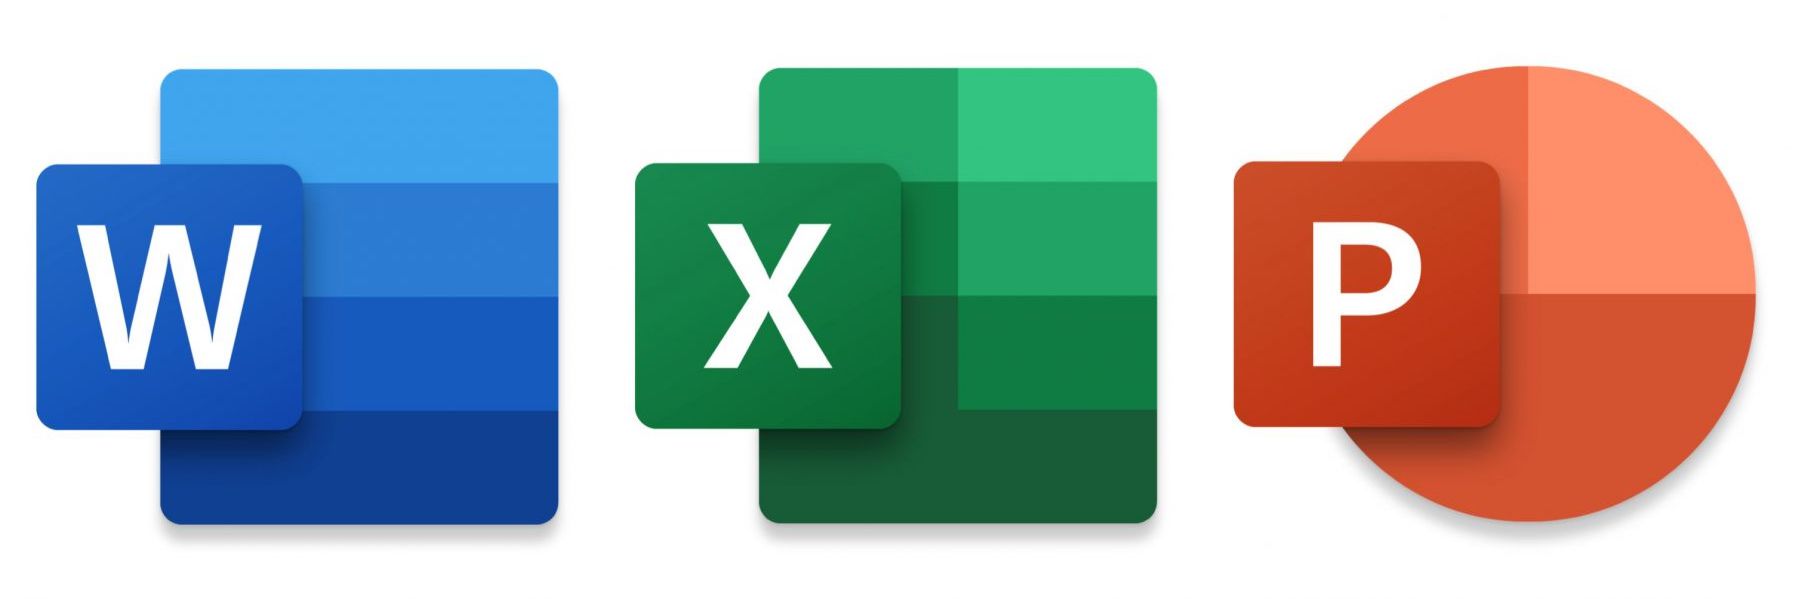 Microsoft Excel For Ipad Now Supports Split View Word Gains Full Trackpad Support And Powerpoint Offers Presenter Coaching Macrumors